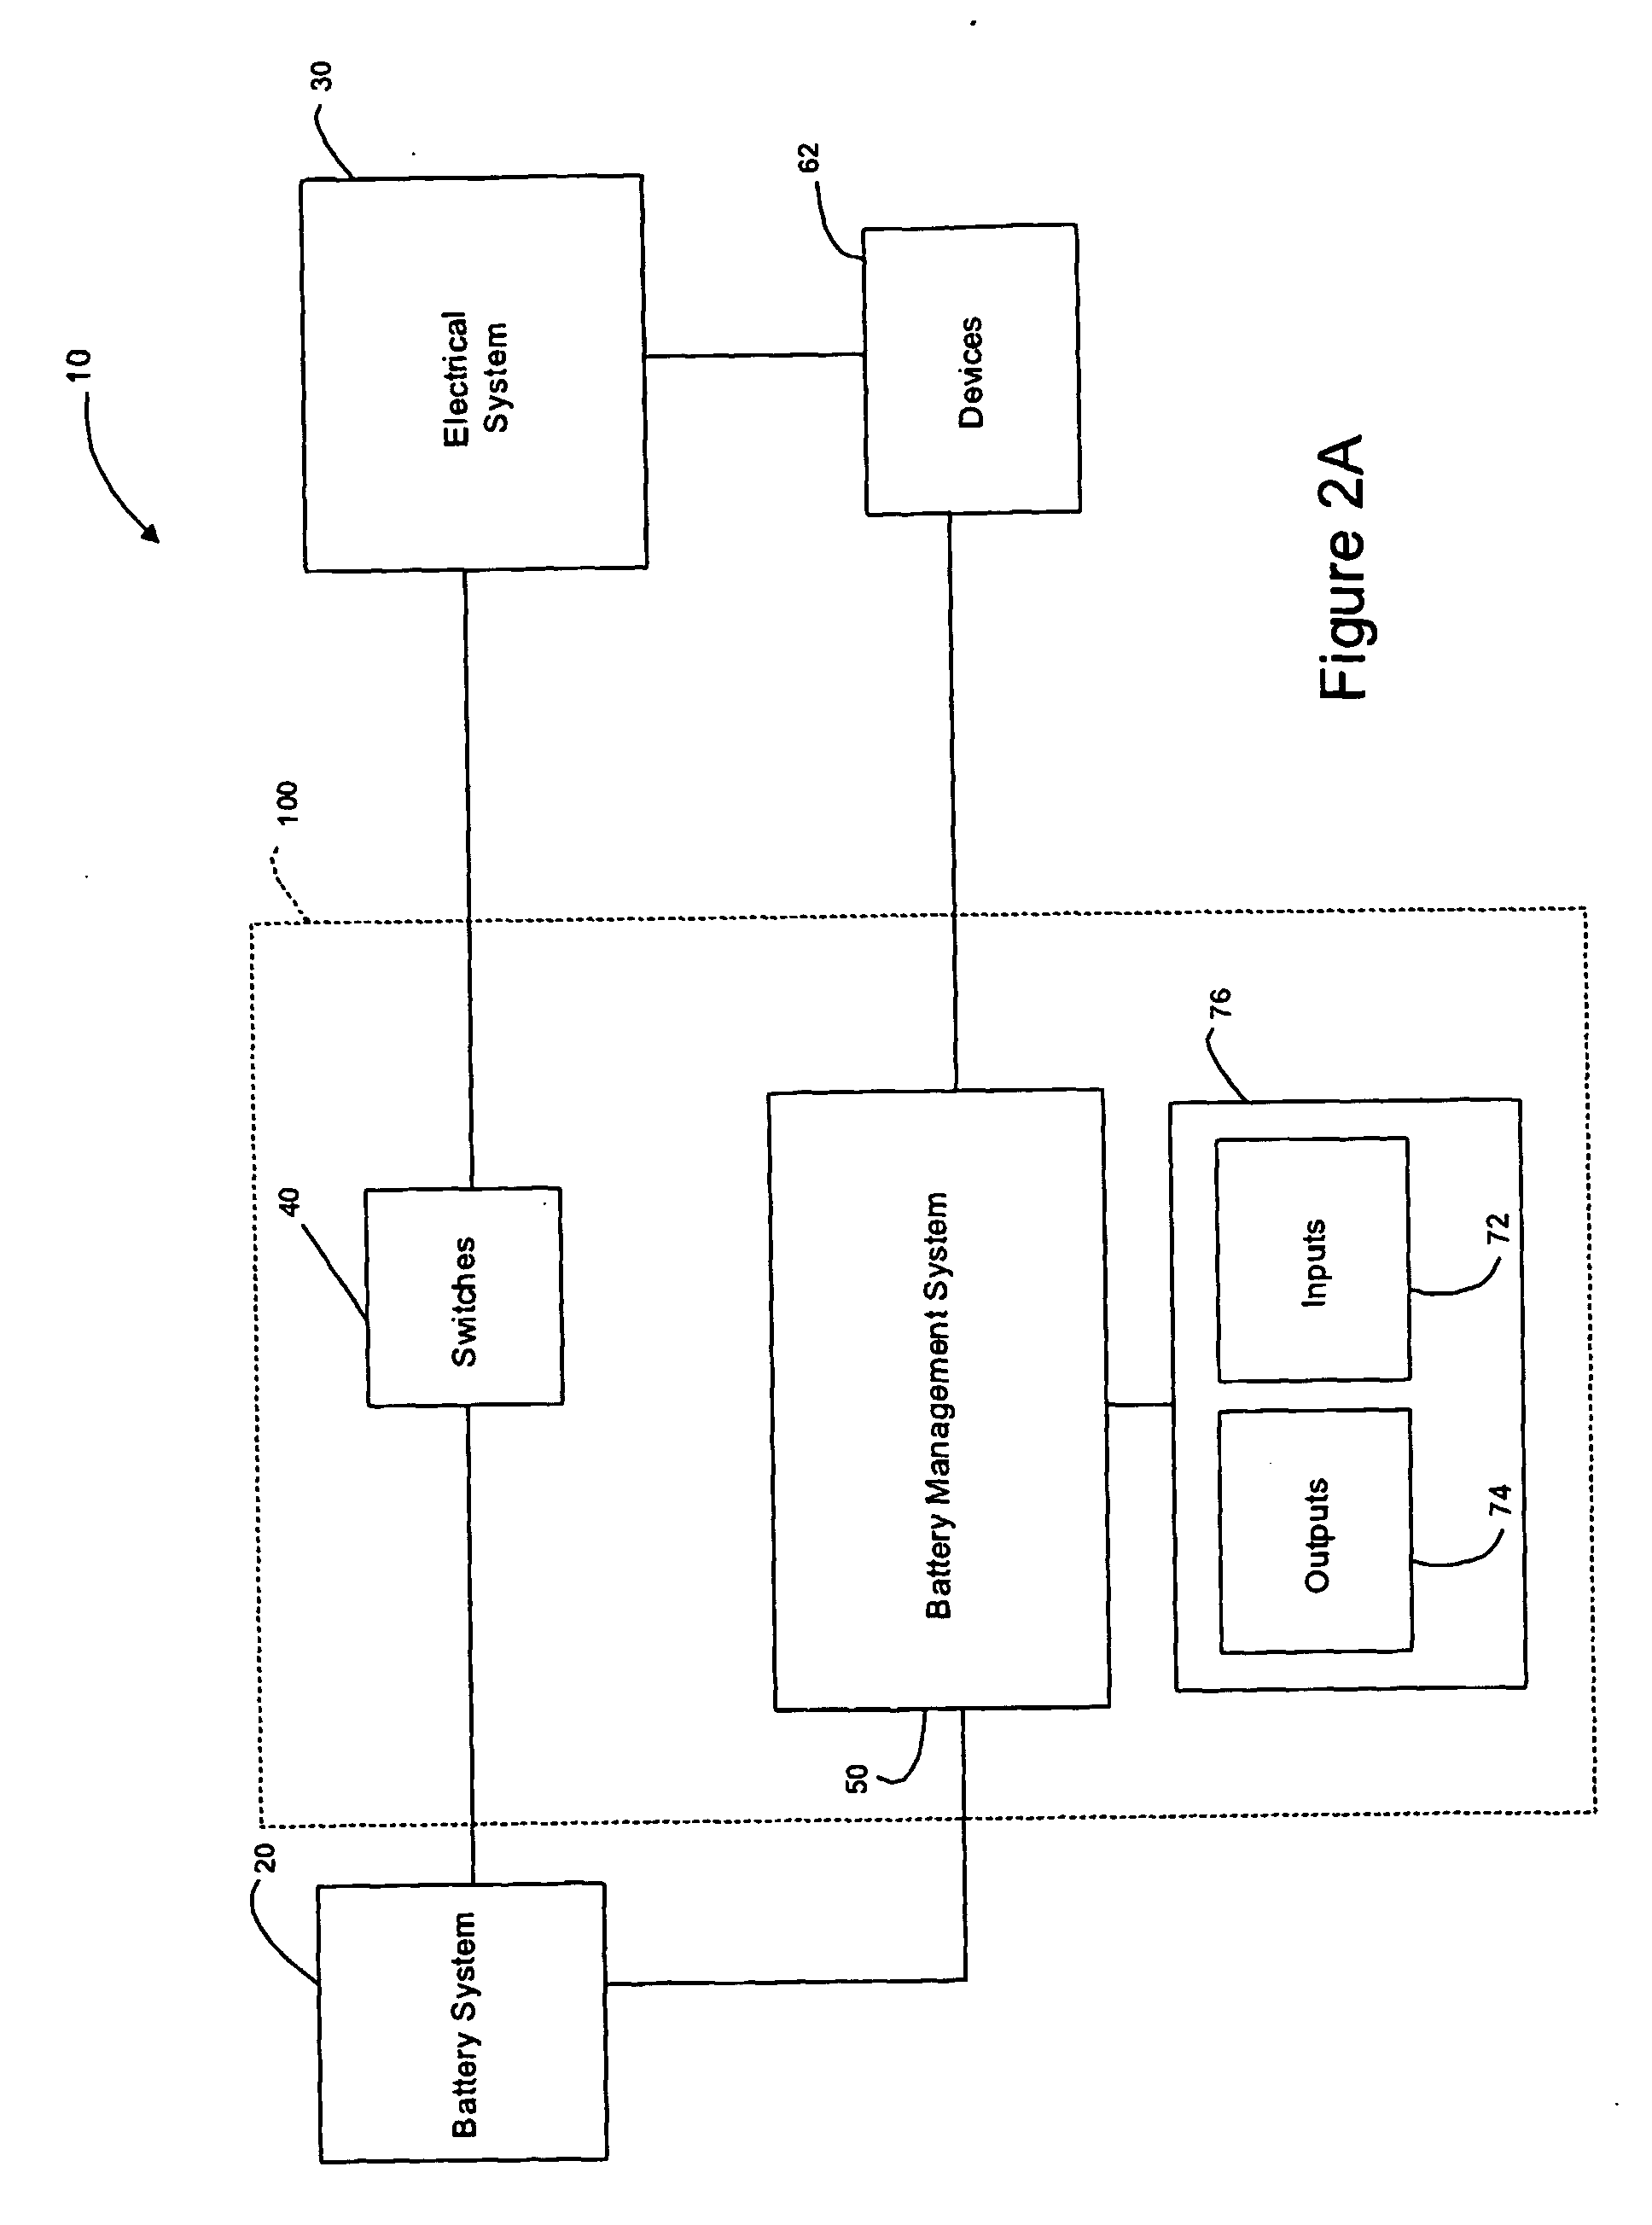 Energy management system for vehicle